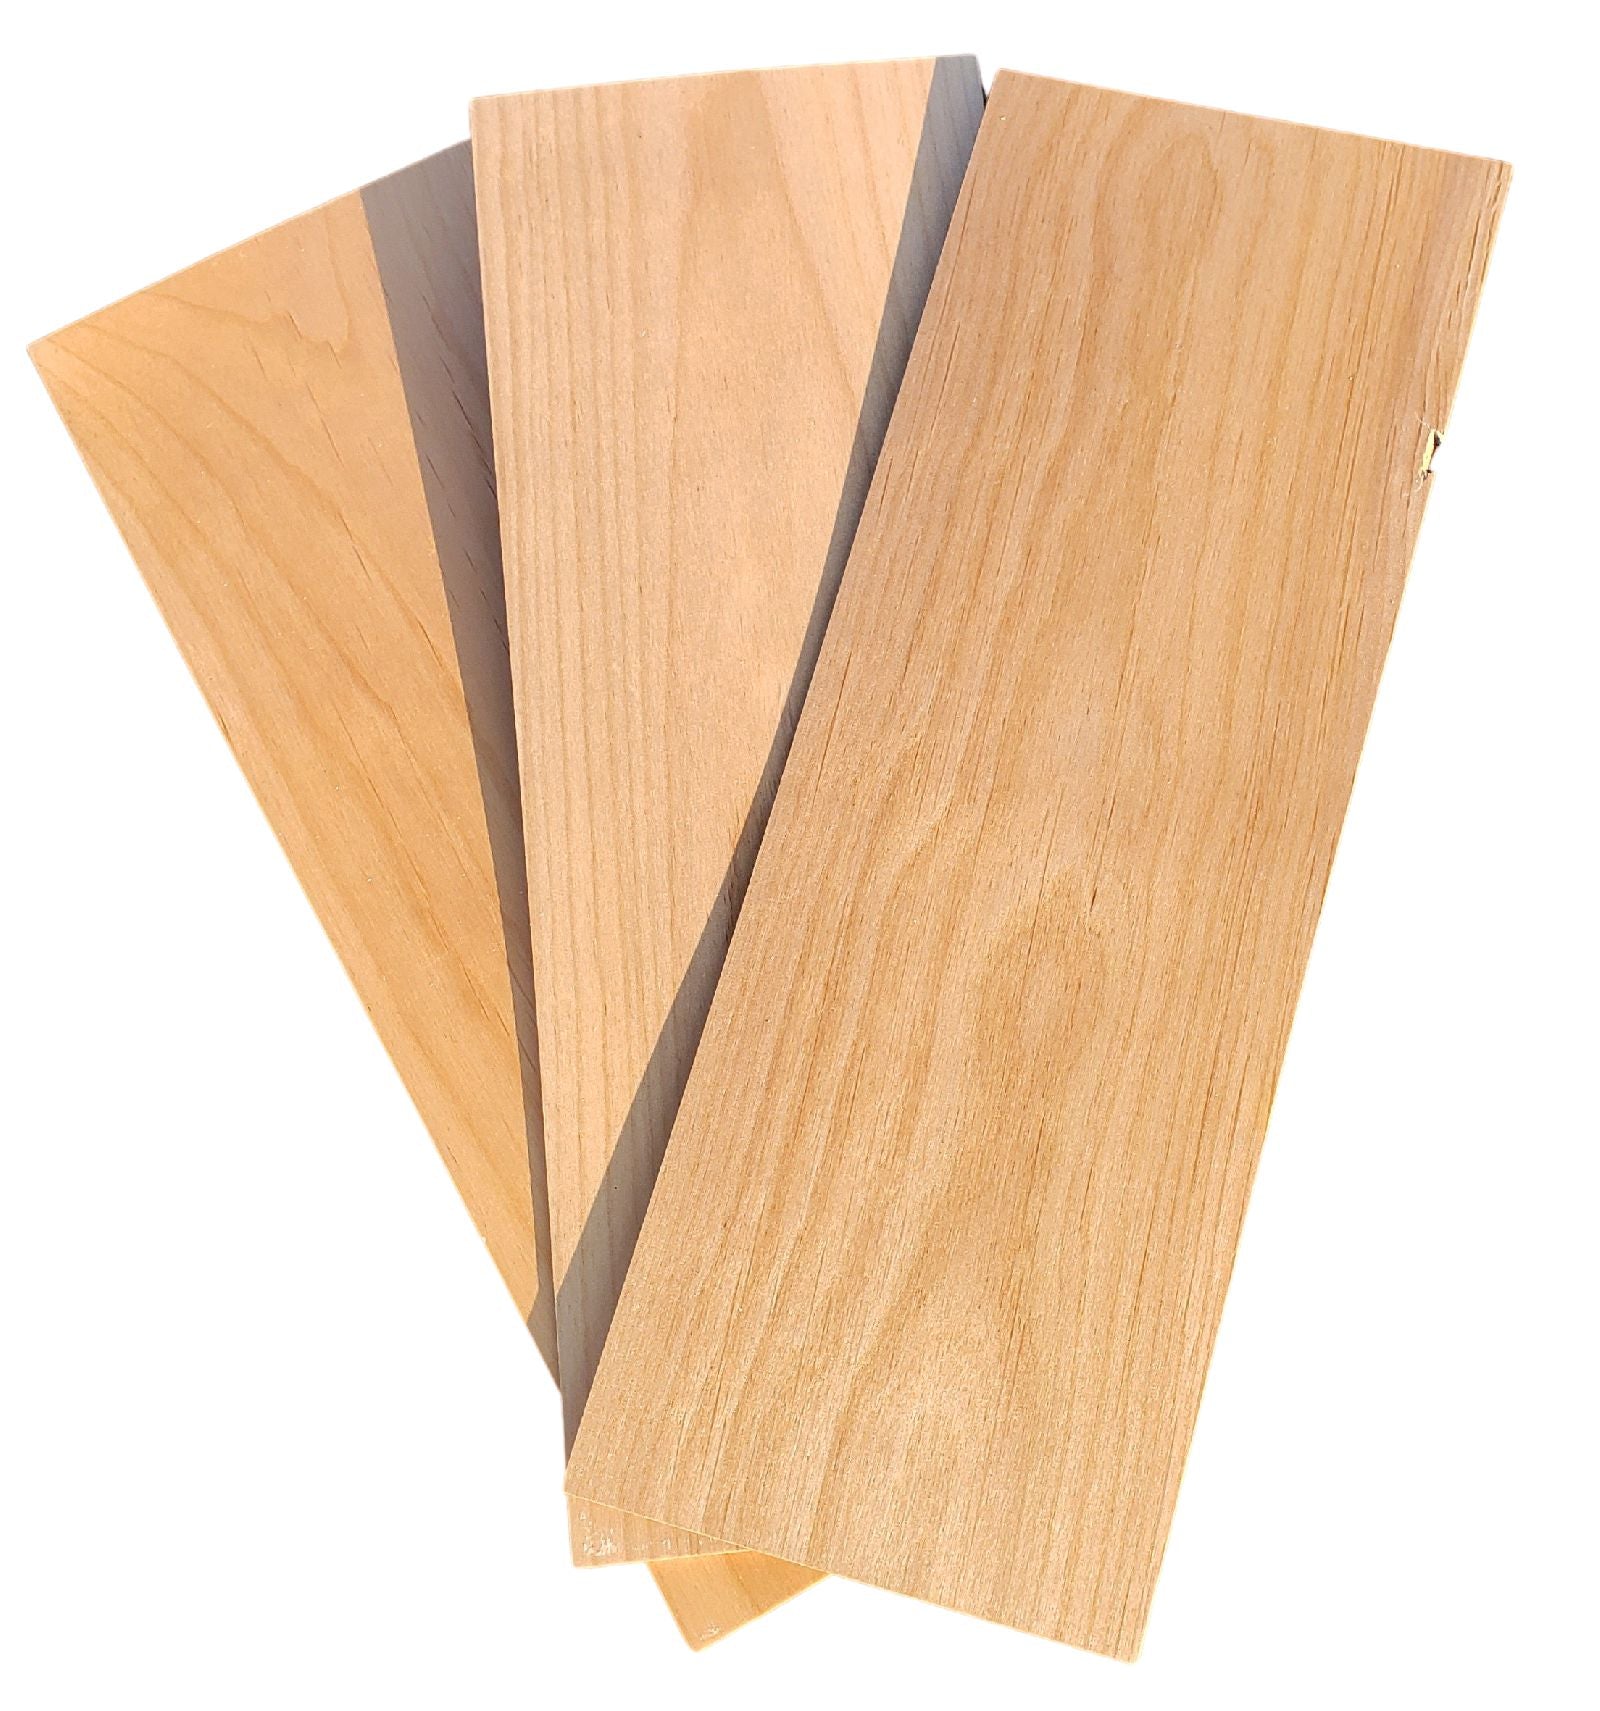 Alder Wood Strips, 1/8" thick 4.5x14.5 Pack of 10